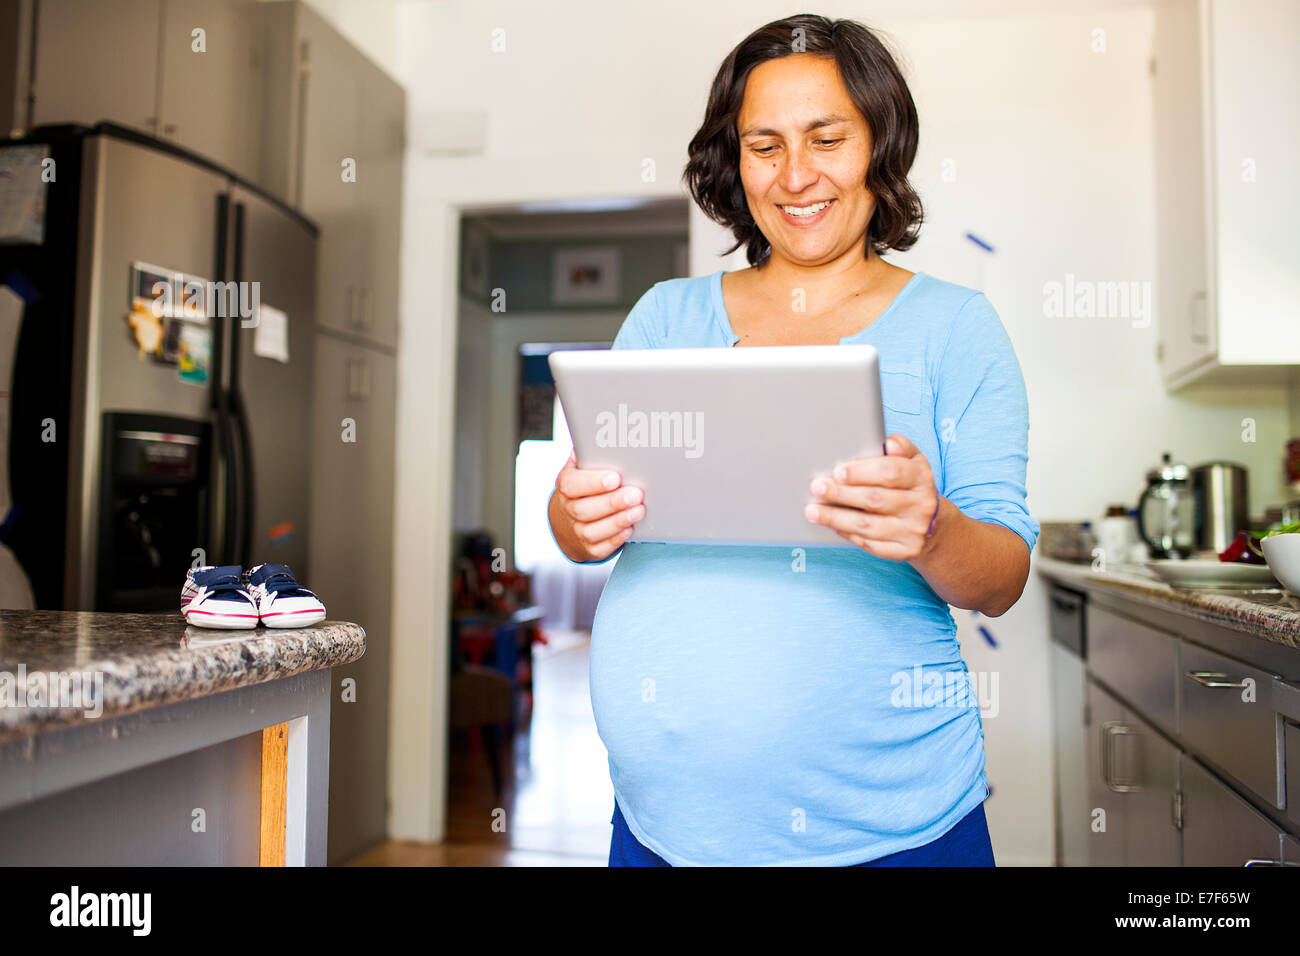 Pregnant Hispanic woman using tablet computer in kitchen Stock Photo